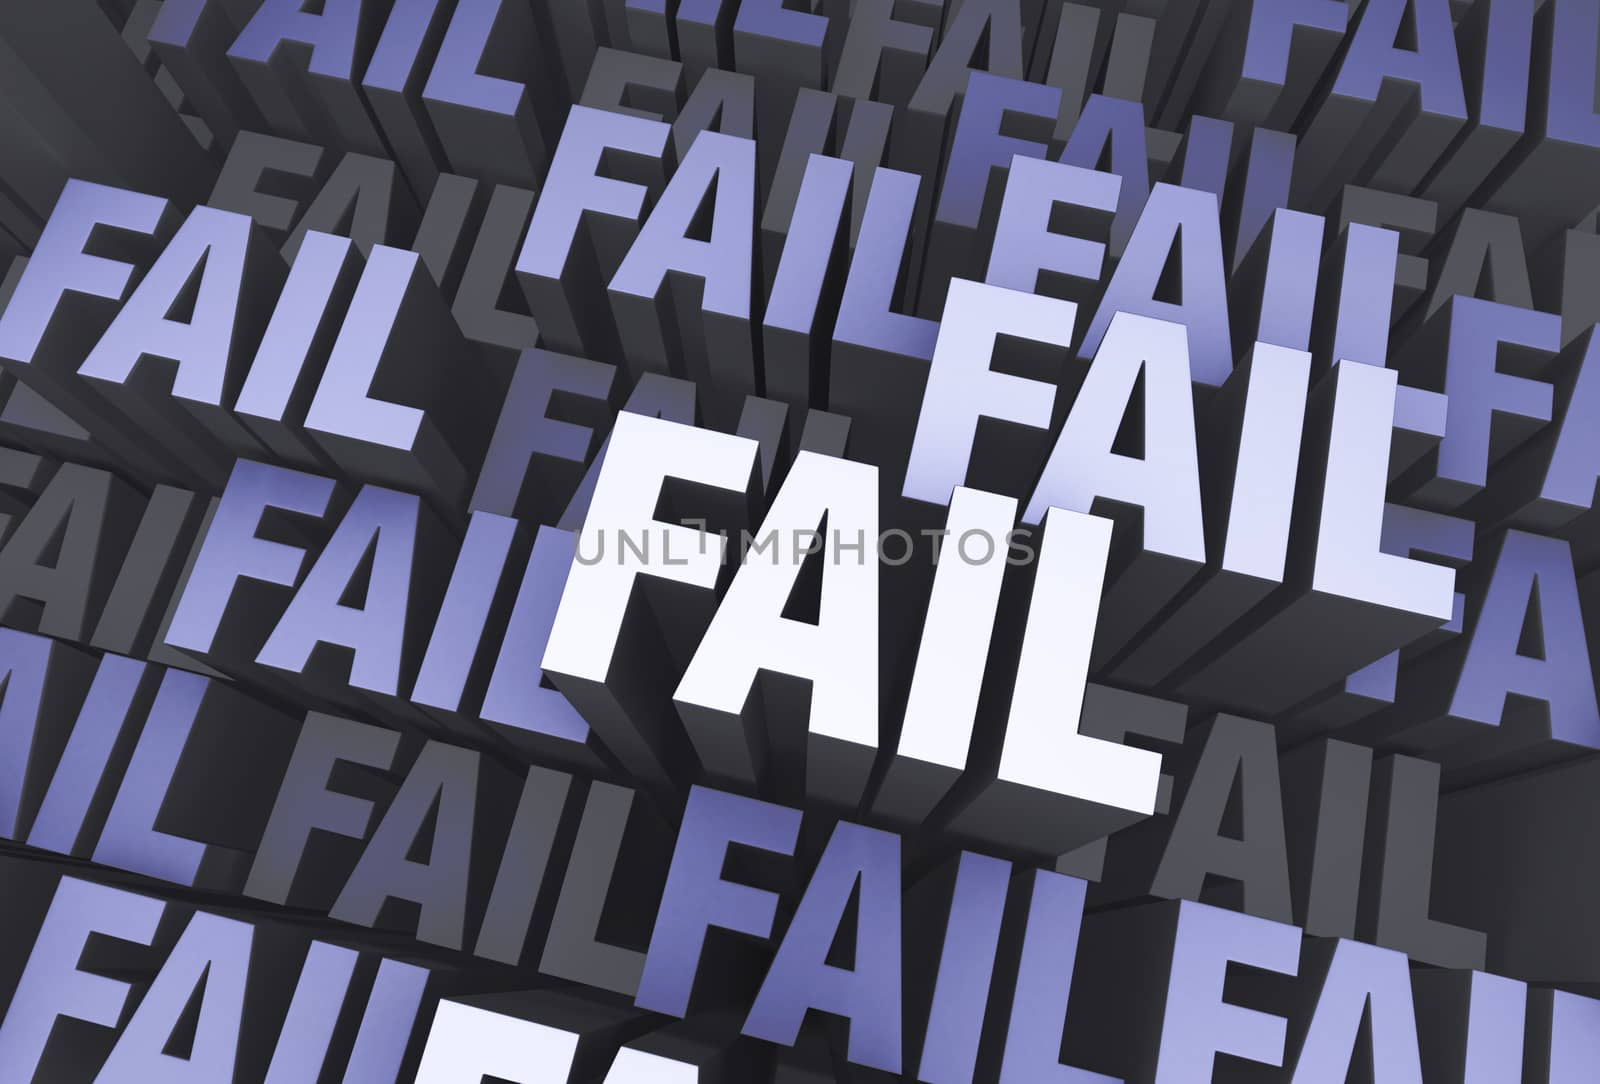 A 3D blue gray background filled with the word "FAIL" repeated many times a different depths.
